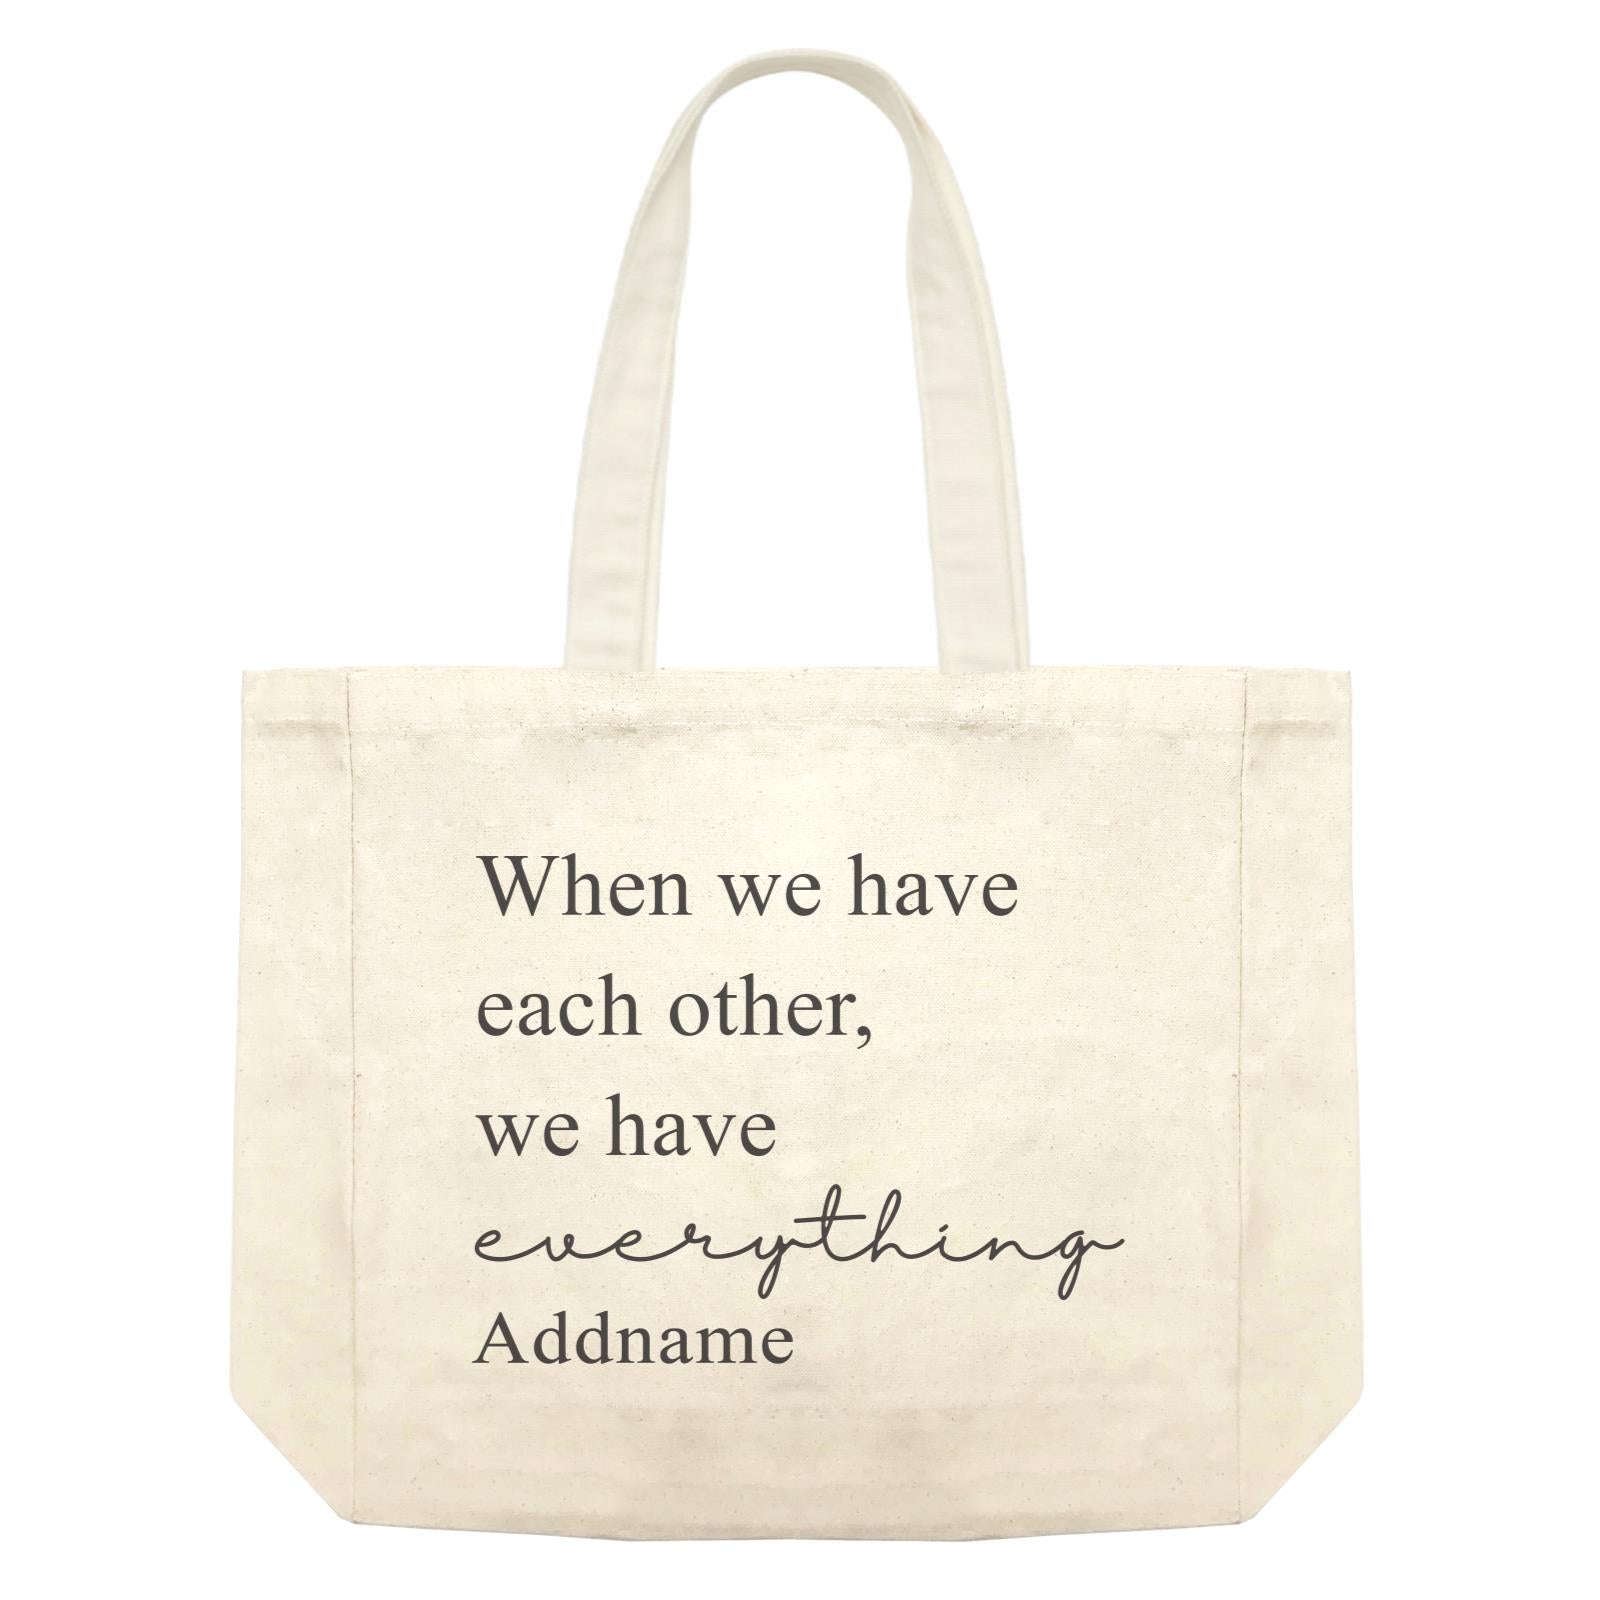 Family Is Everythings Quotes When We Have Each Other,We Have Everthing Addname Shopping Bag